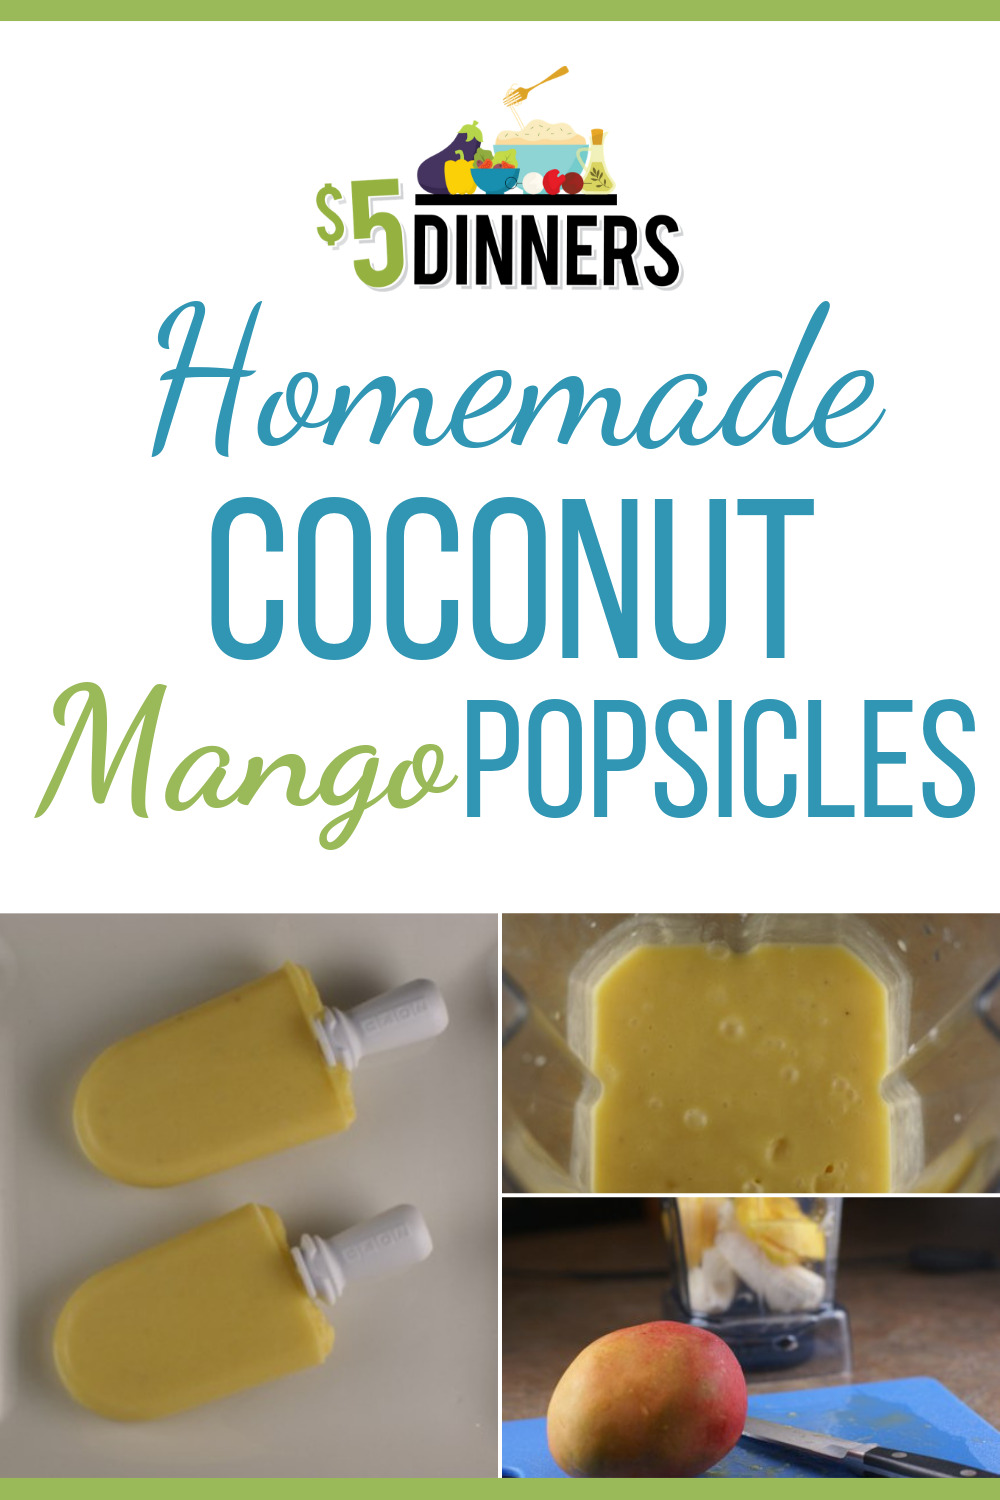 How to Make Homemade Coconut Mango Popsicles (Dairy Free)